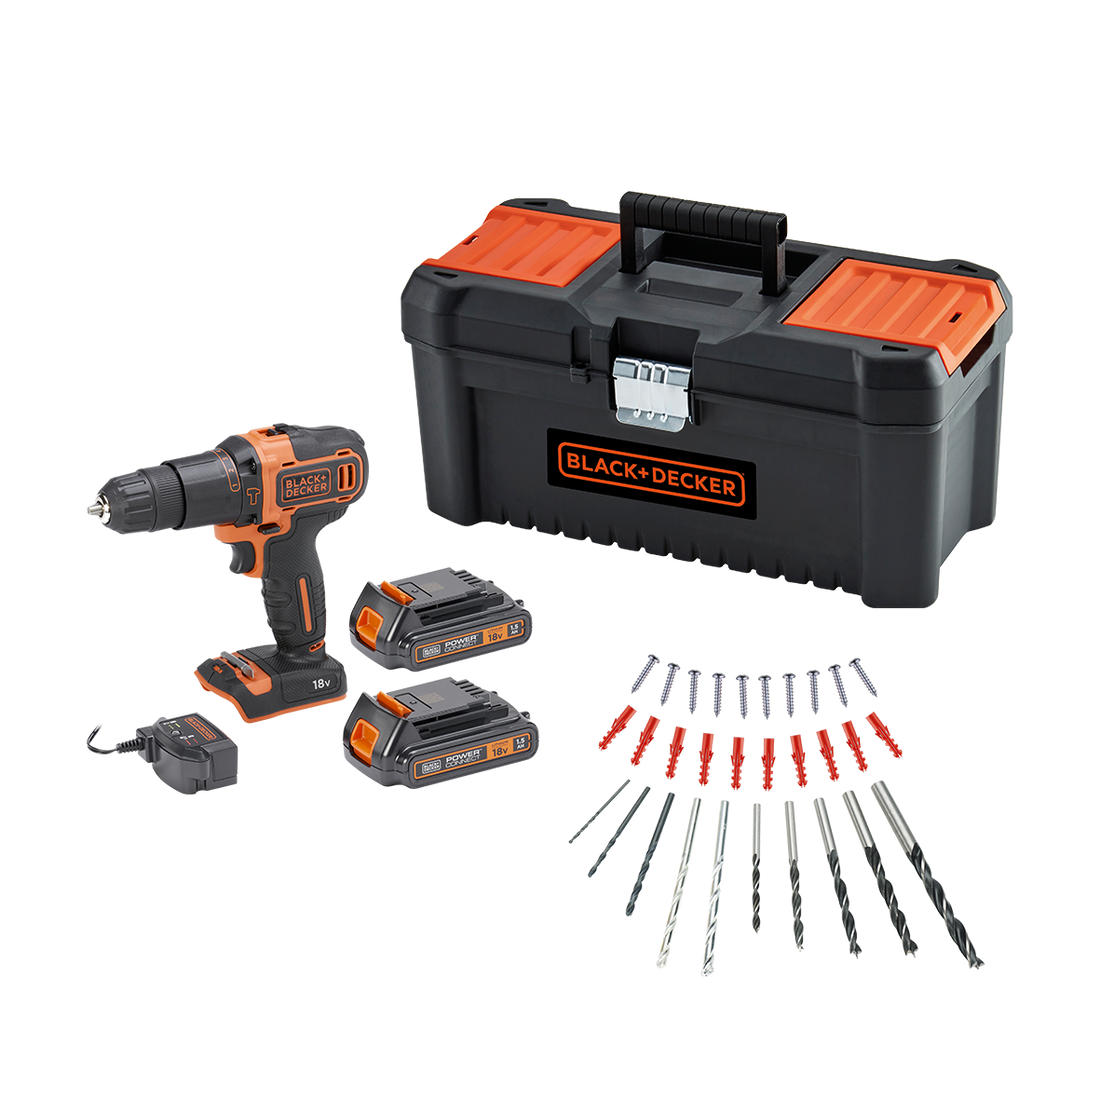 POWER DRILL BLACK&amp;DECKER 18V WITH 2 X 1.5AH BATTERIES WITH 16 INCH CASE AND DRILL BIT SET - best price from Maltashopper.com BR400003582